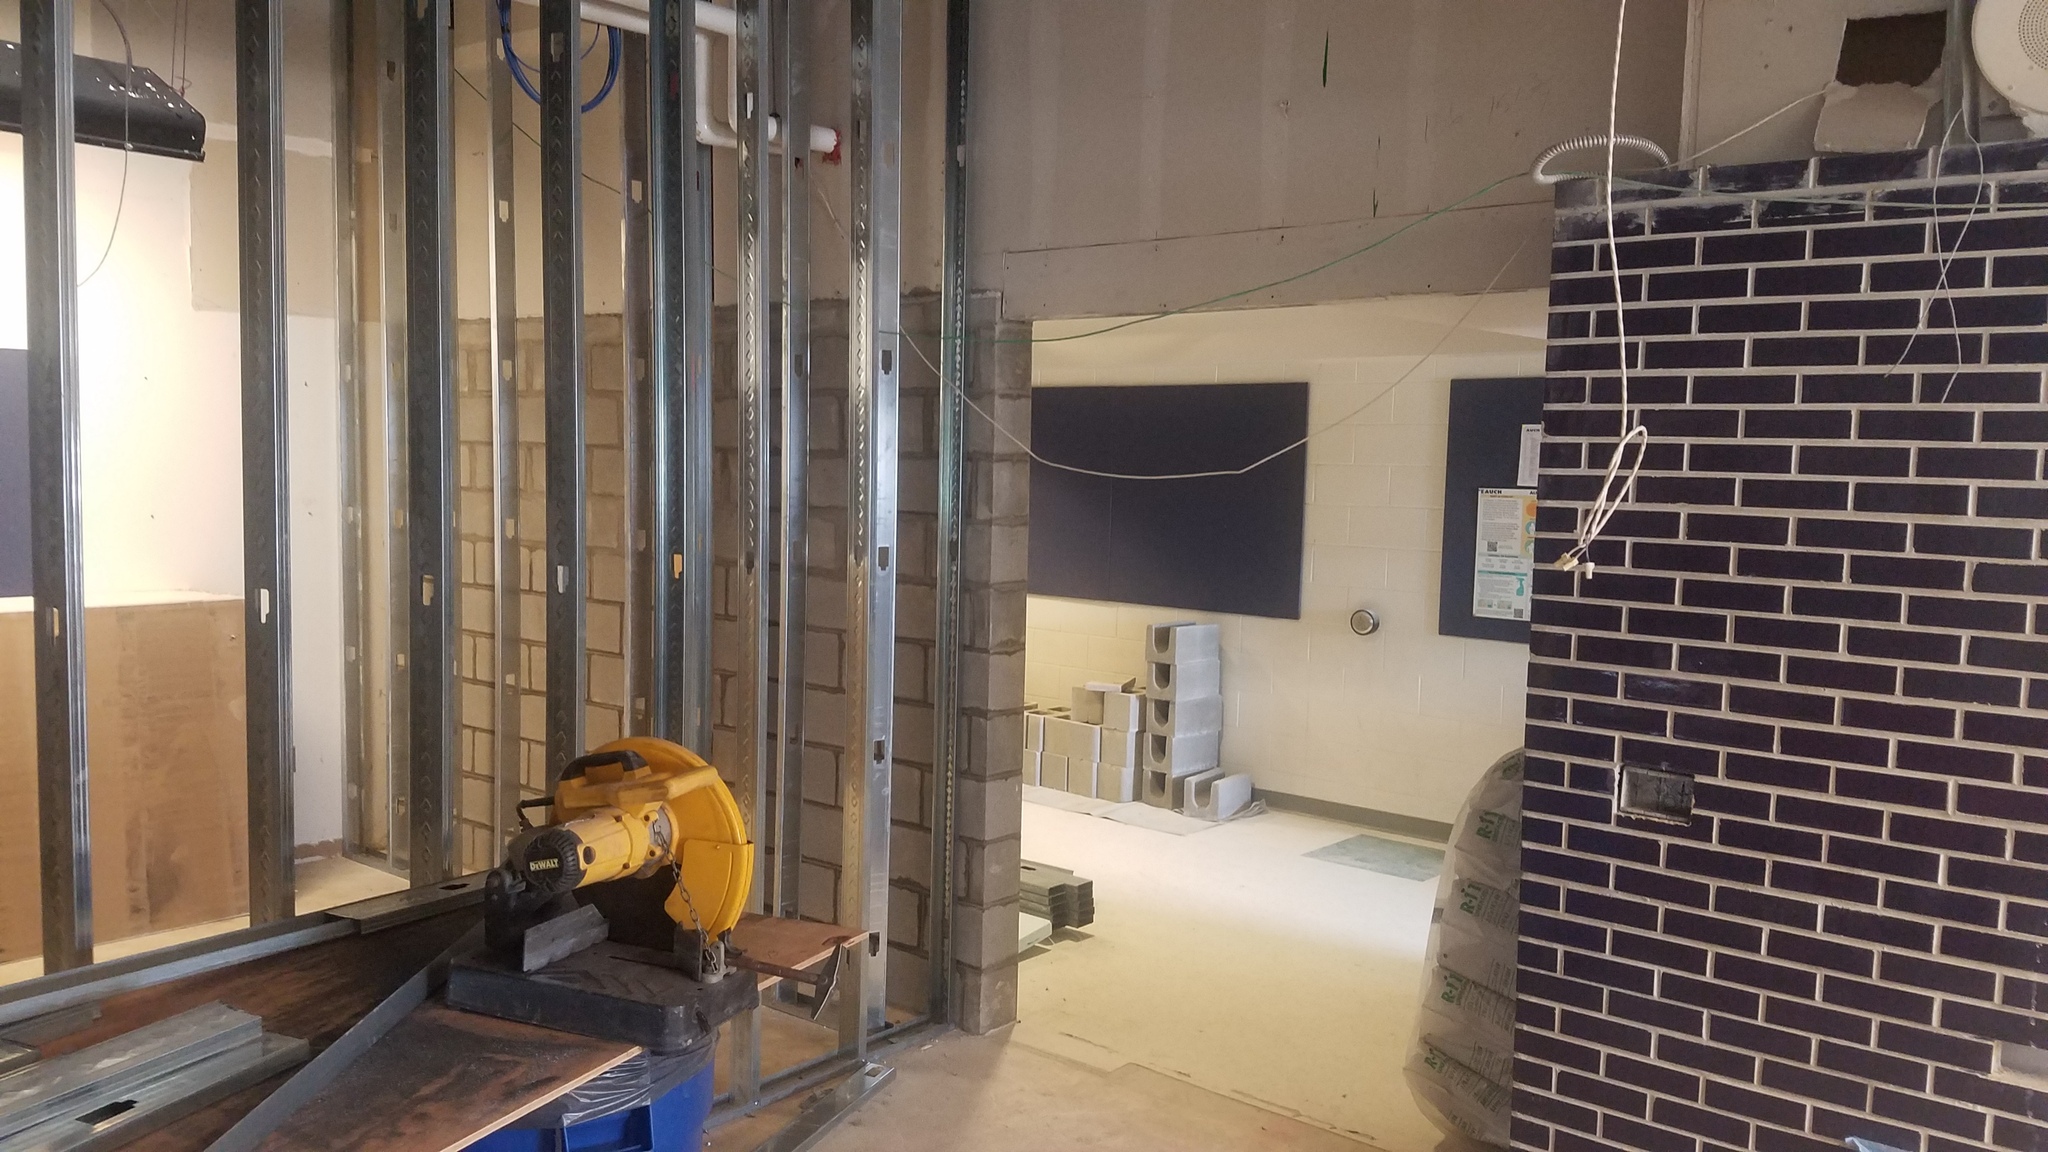 View of wall construction with new entry way